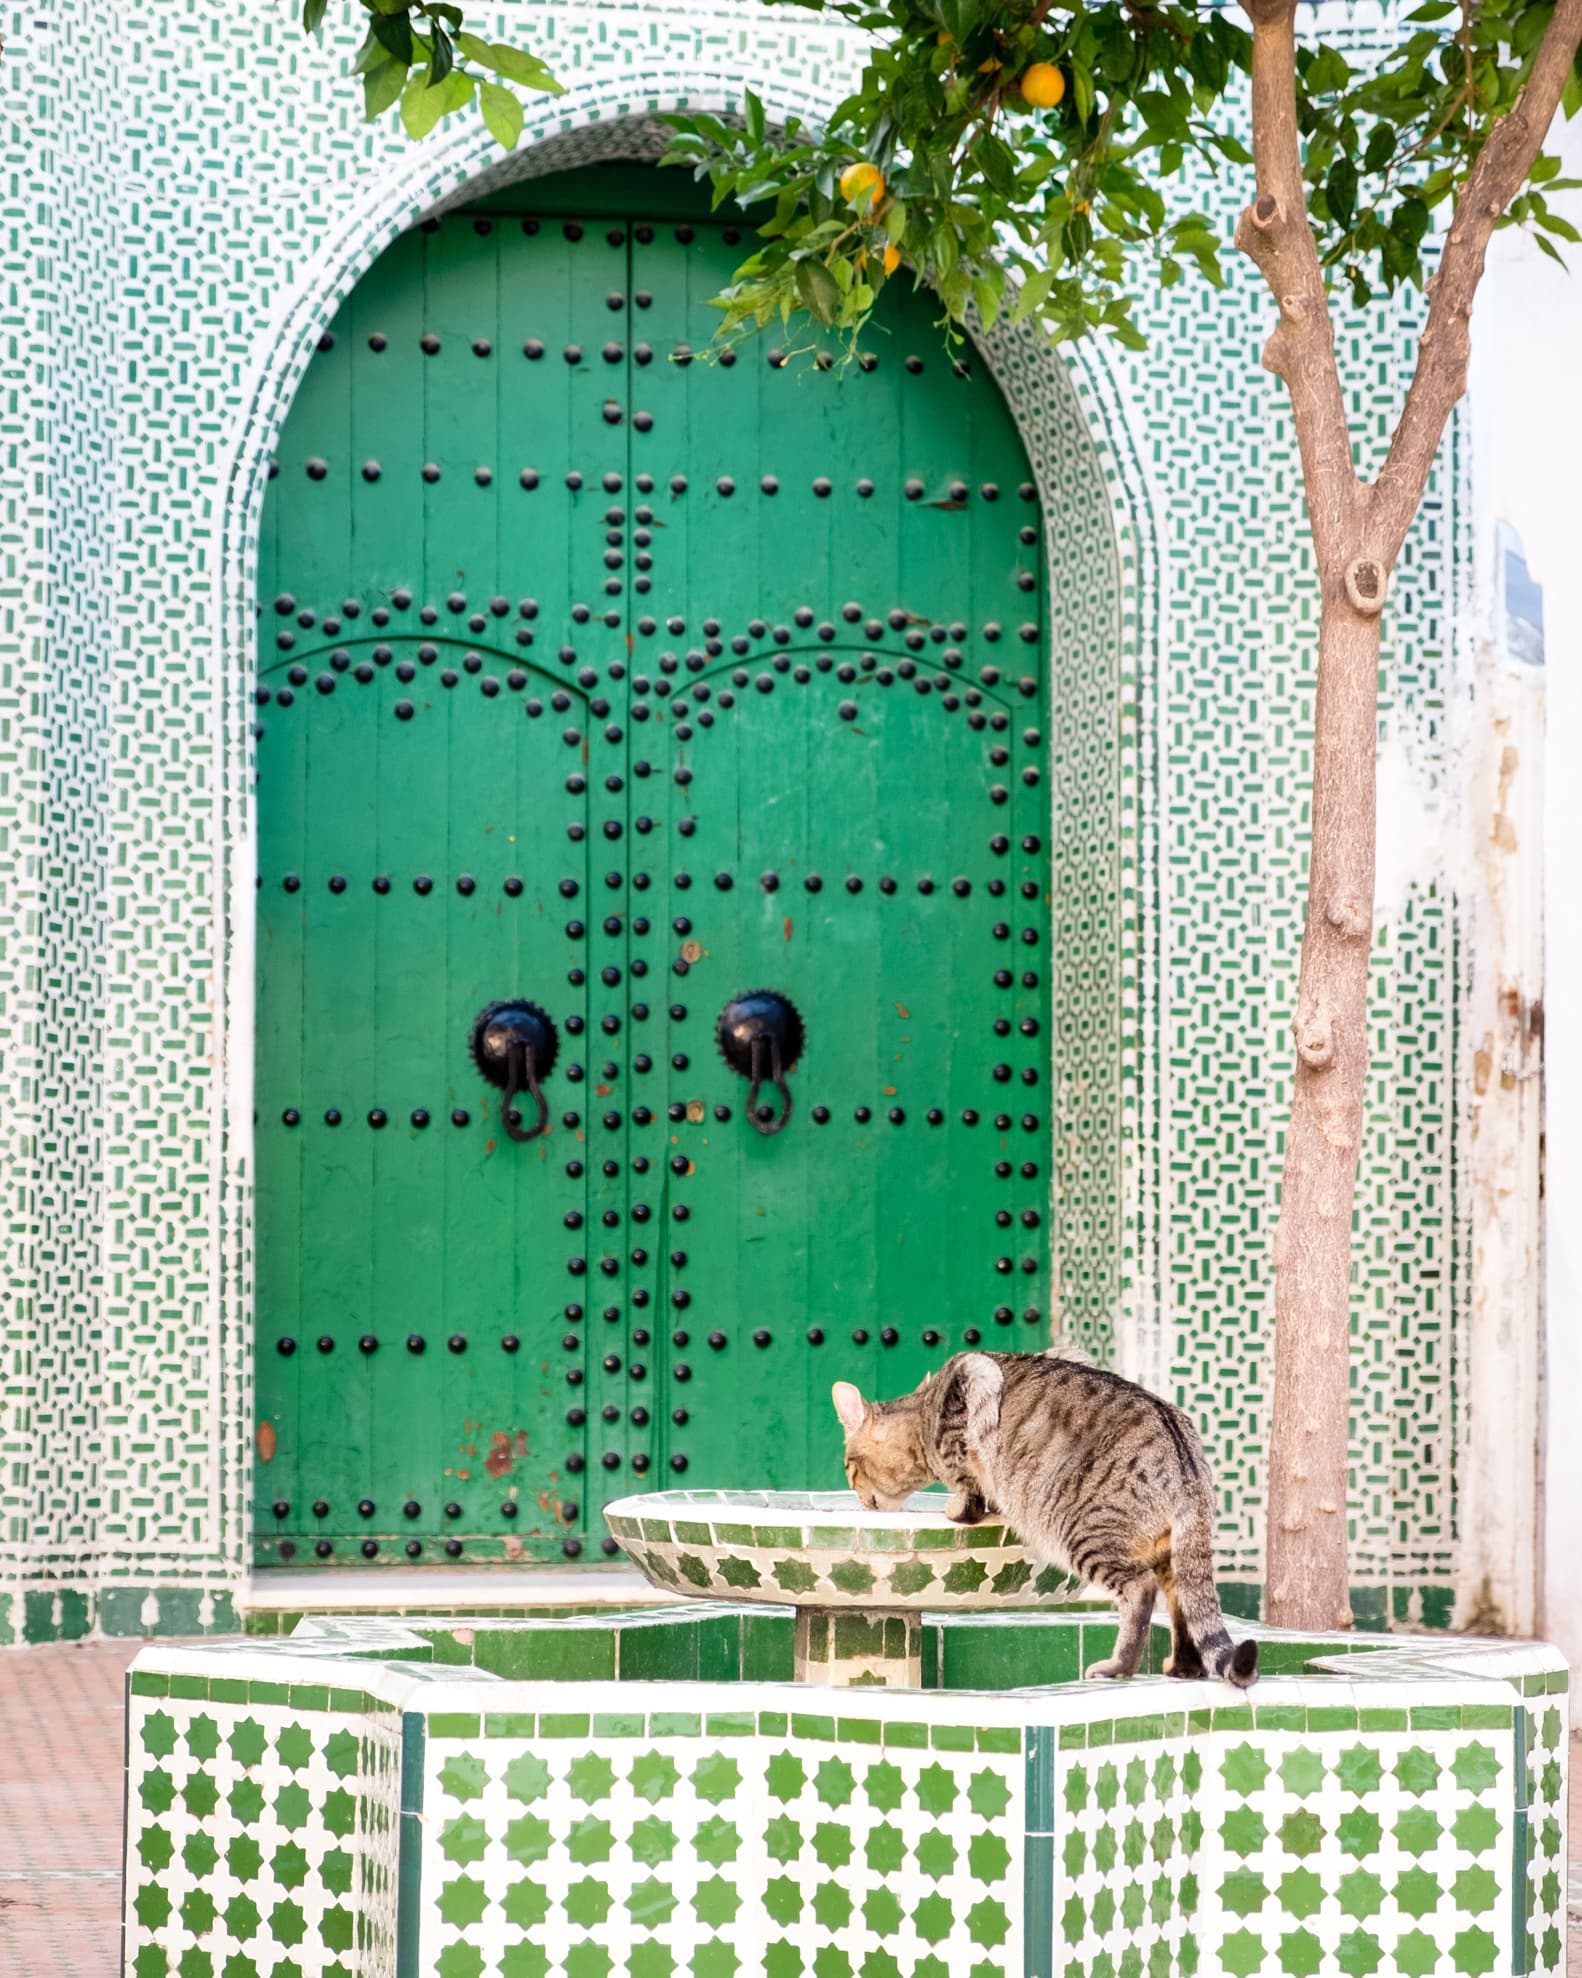 Amongst all the blue, a green corner with a cat drinking from a fountain, Chefchaouen, Morocco